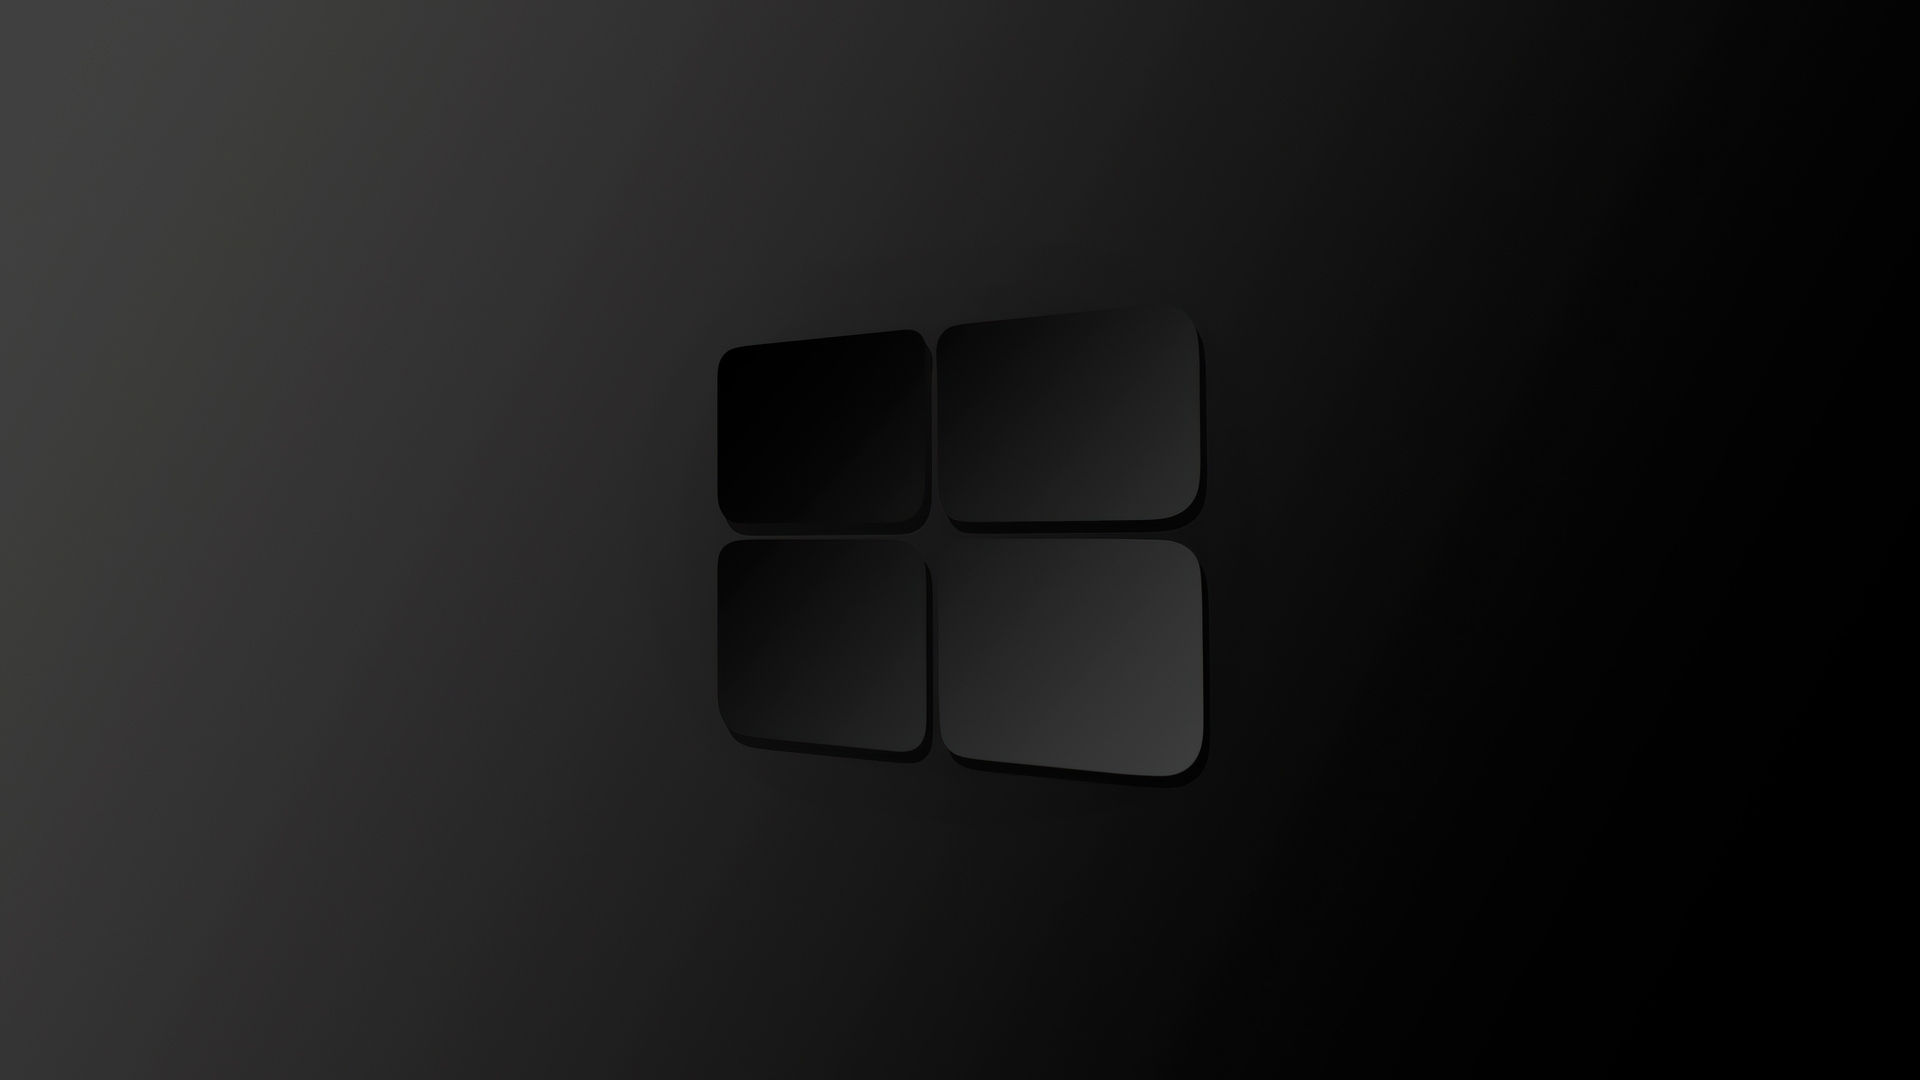 Windows 10 Darkness Logo 4k Laptop Full HD 1080P HD 4k Wallpaper, Image, Background, Photo and Picture